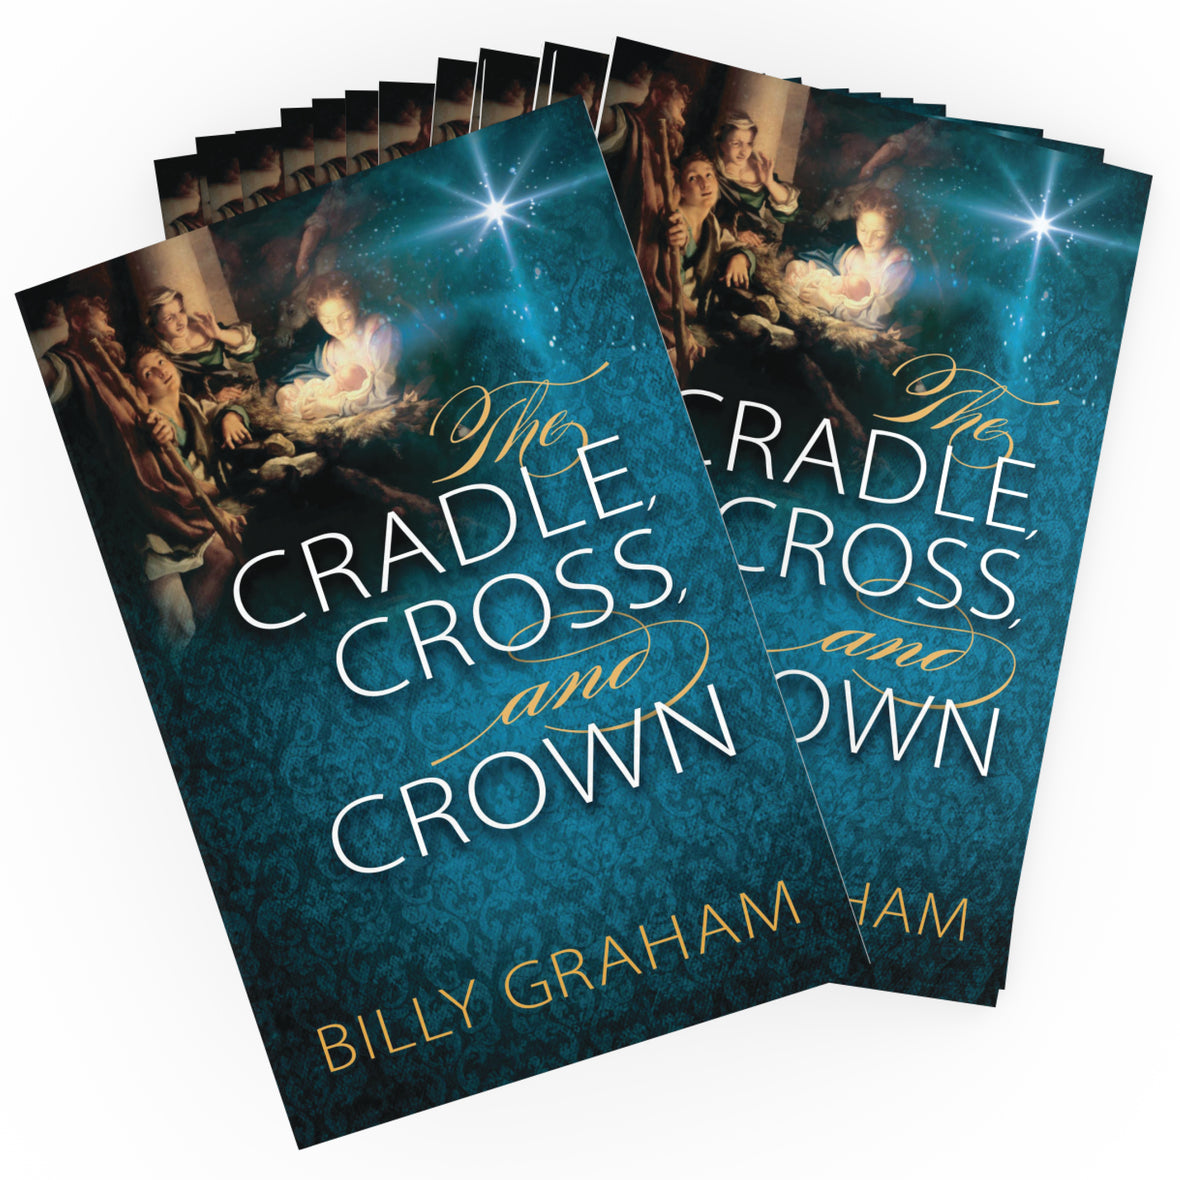 The Cradle, Cross, and Crown 15-Pack Bundle